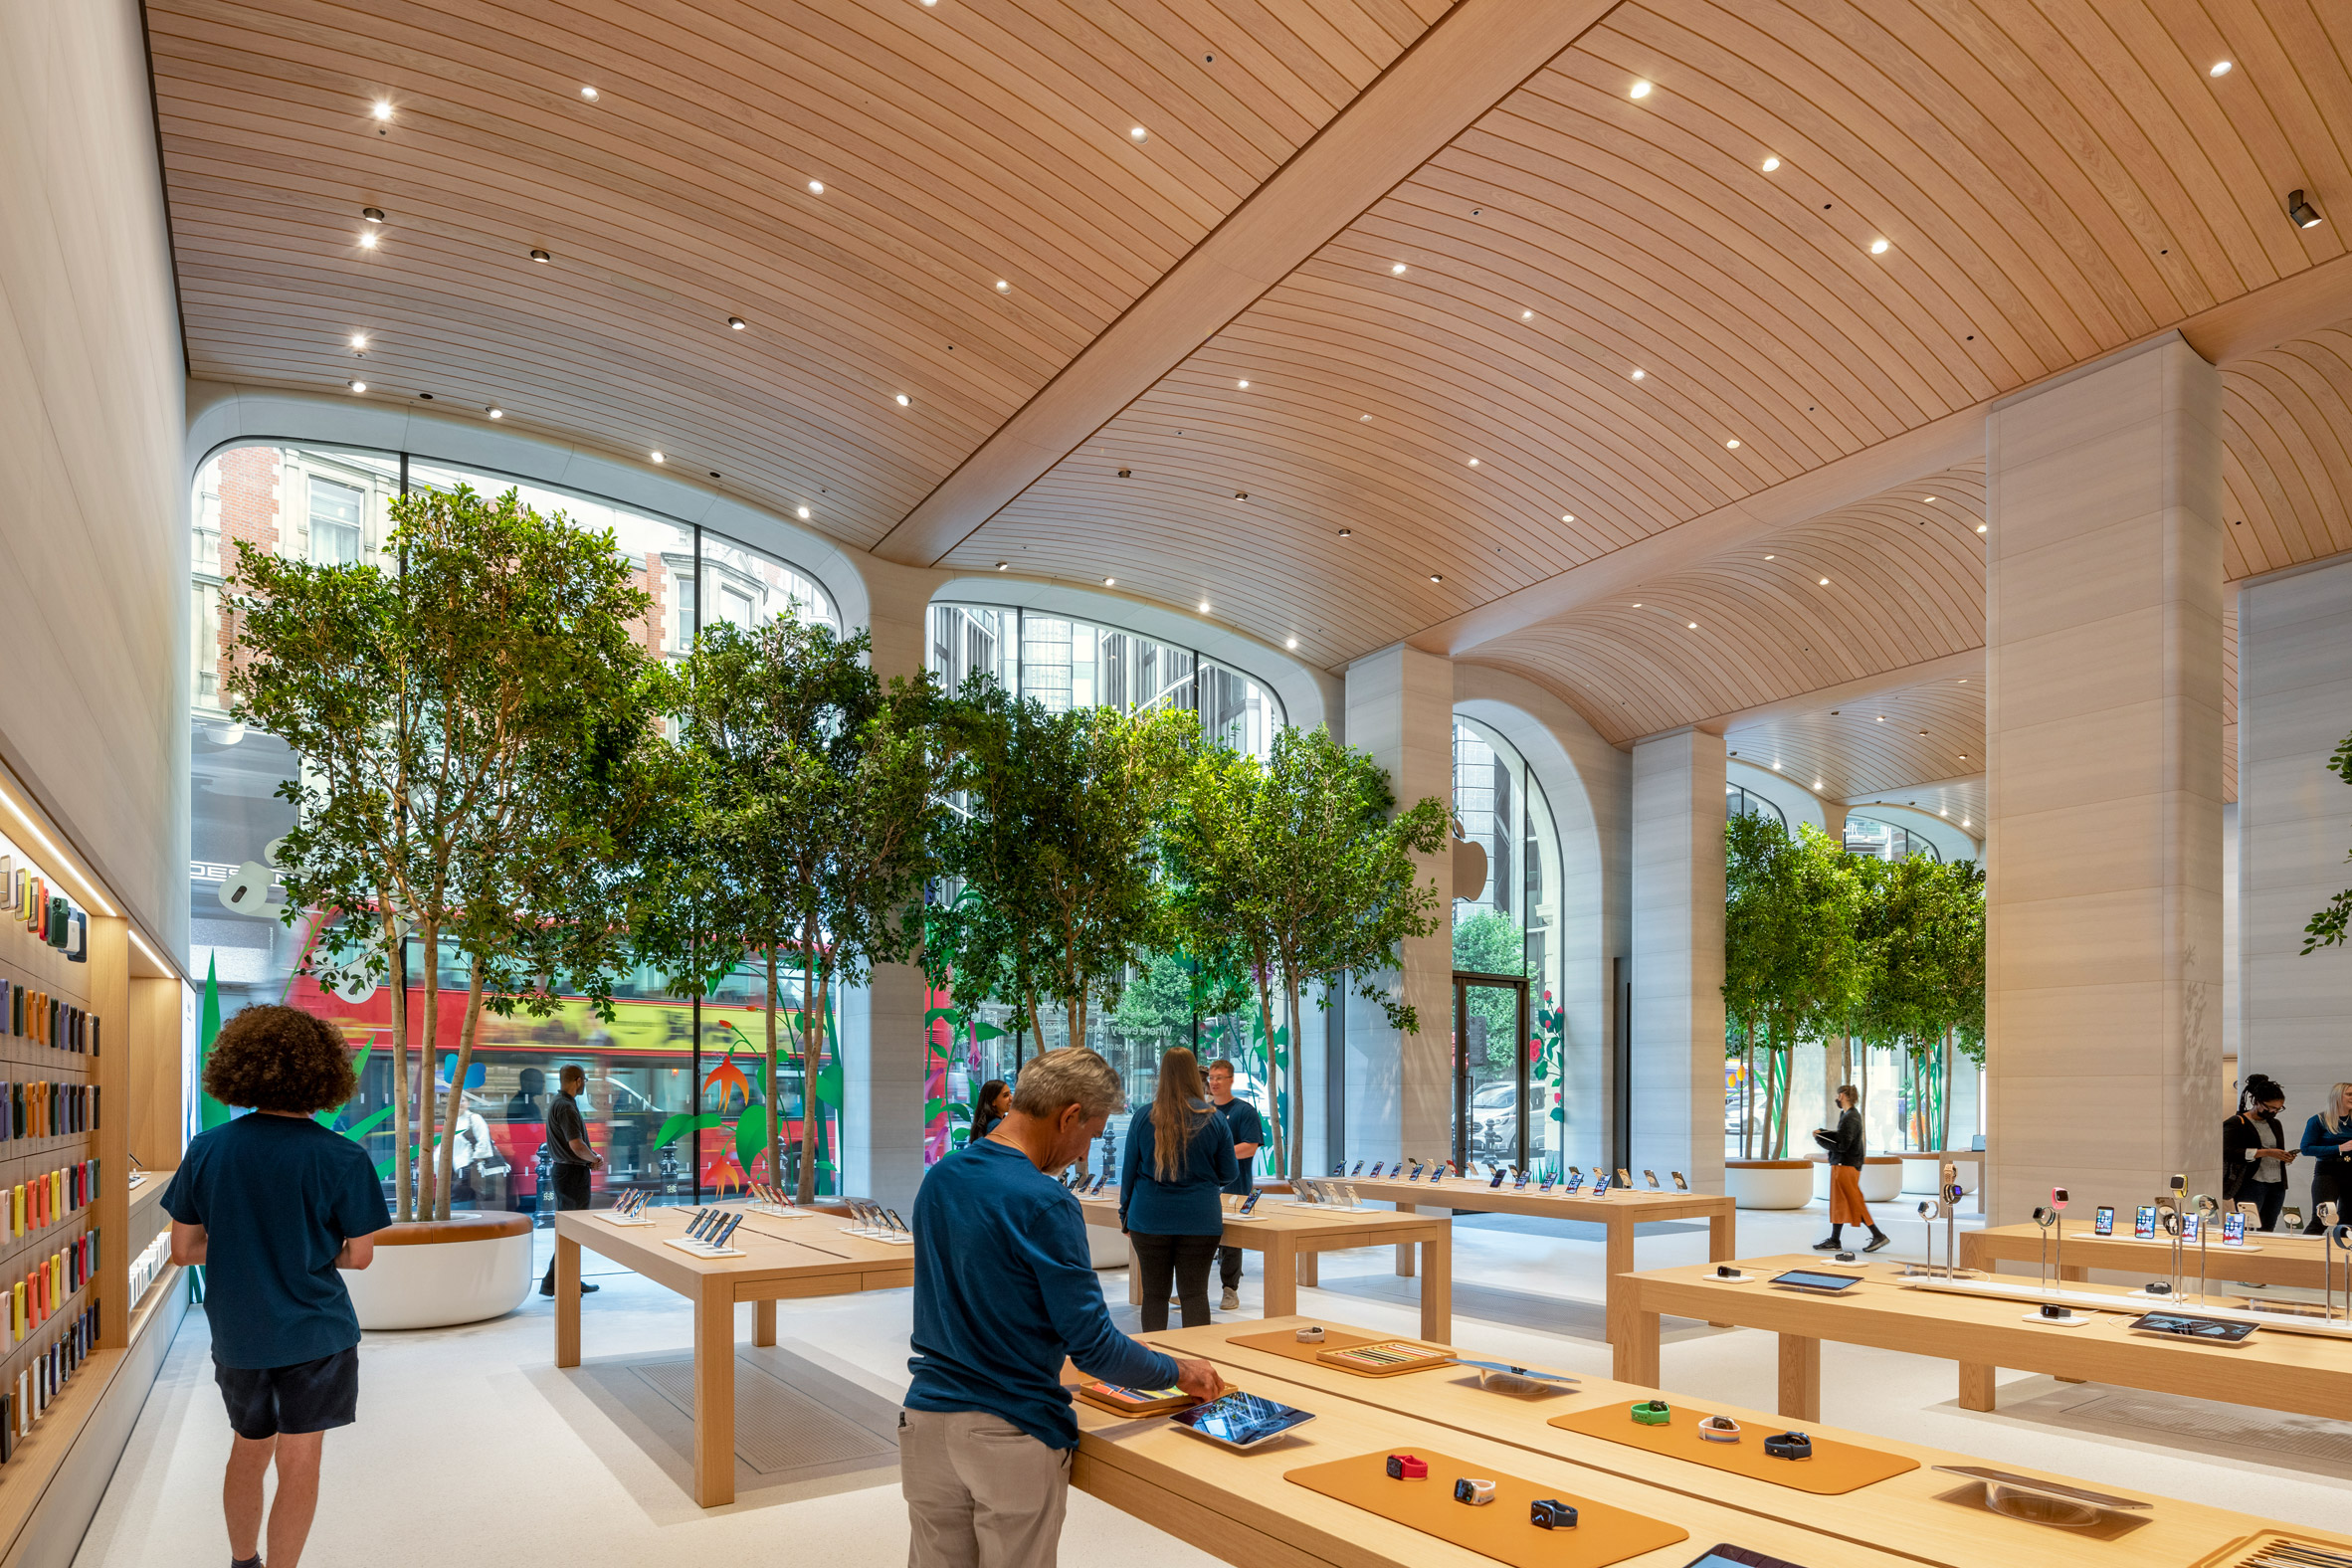 Vaulted timber roof at Apple Store in London